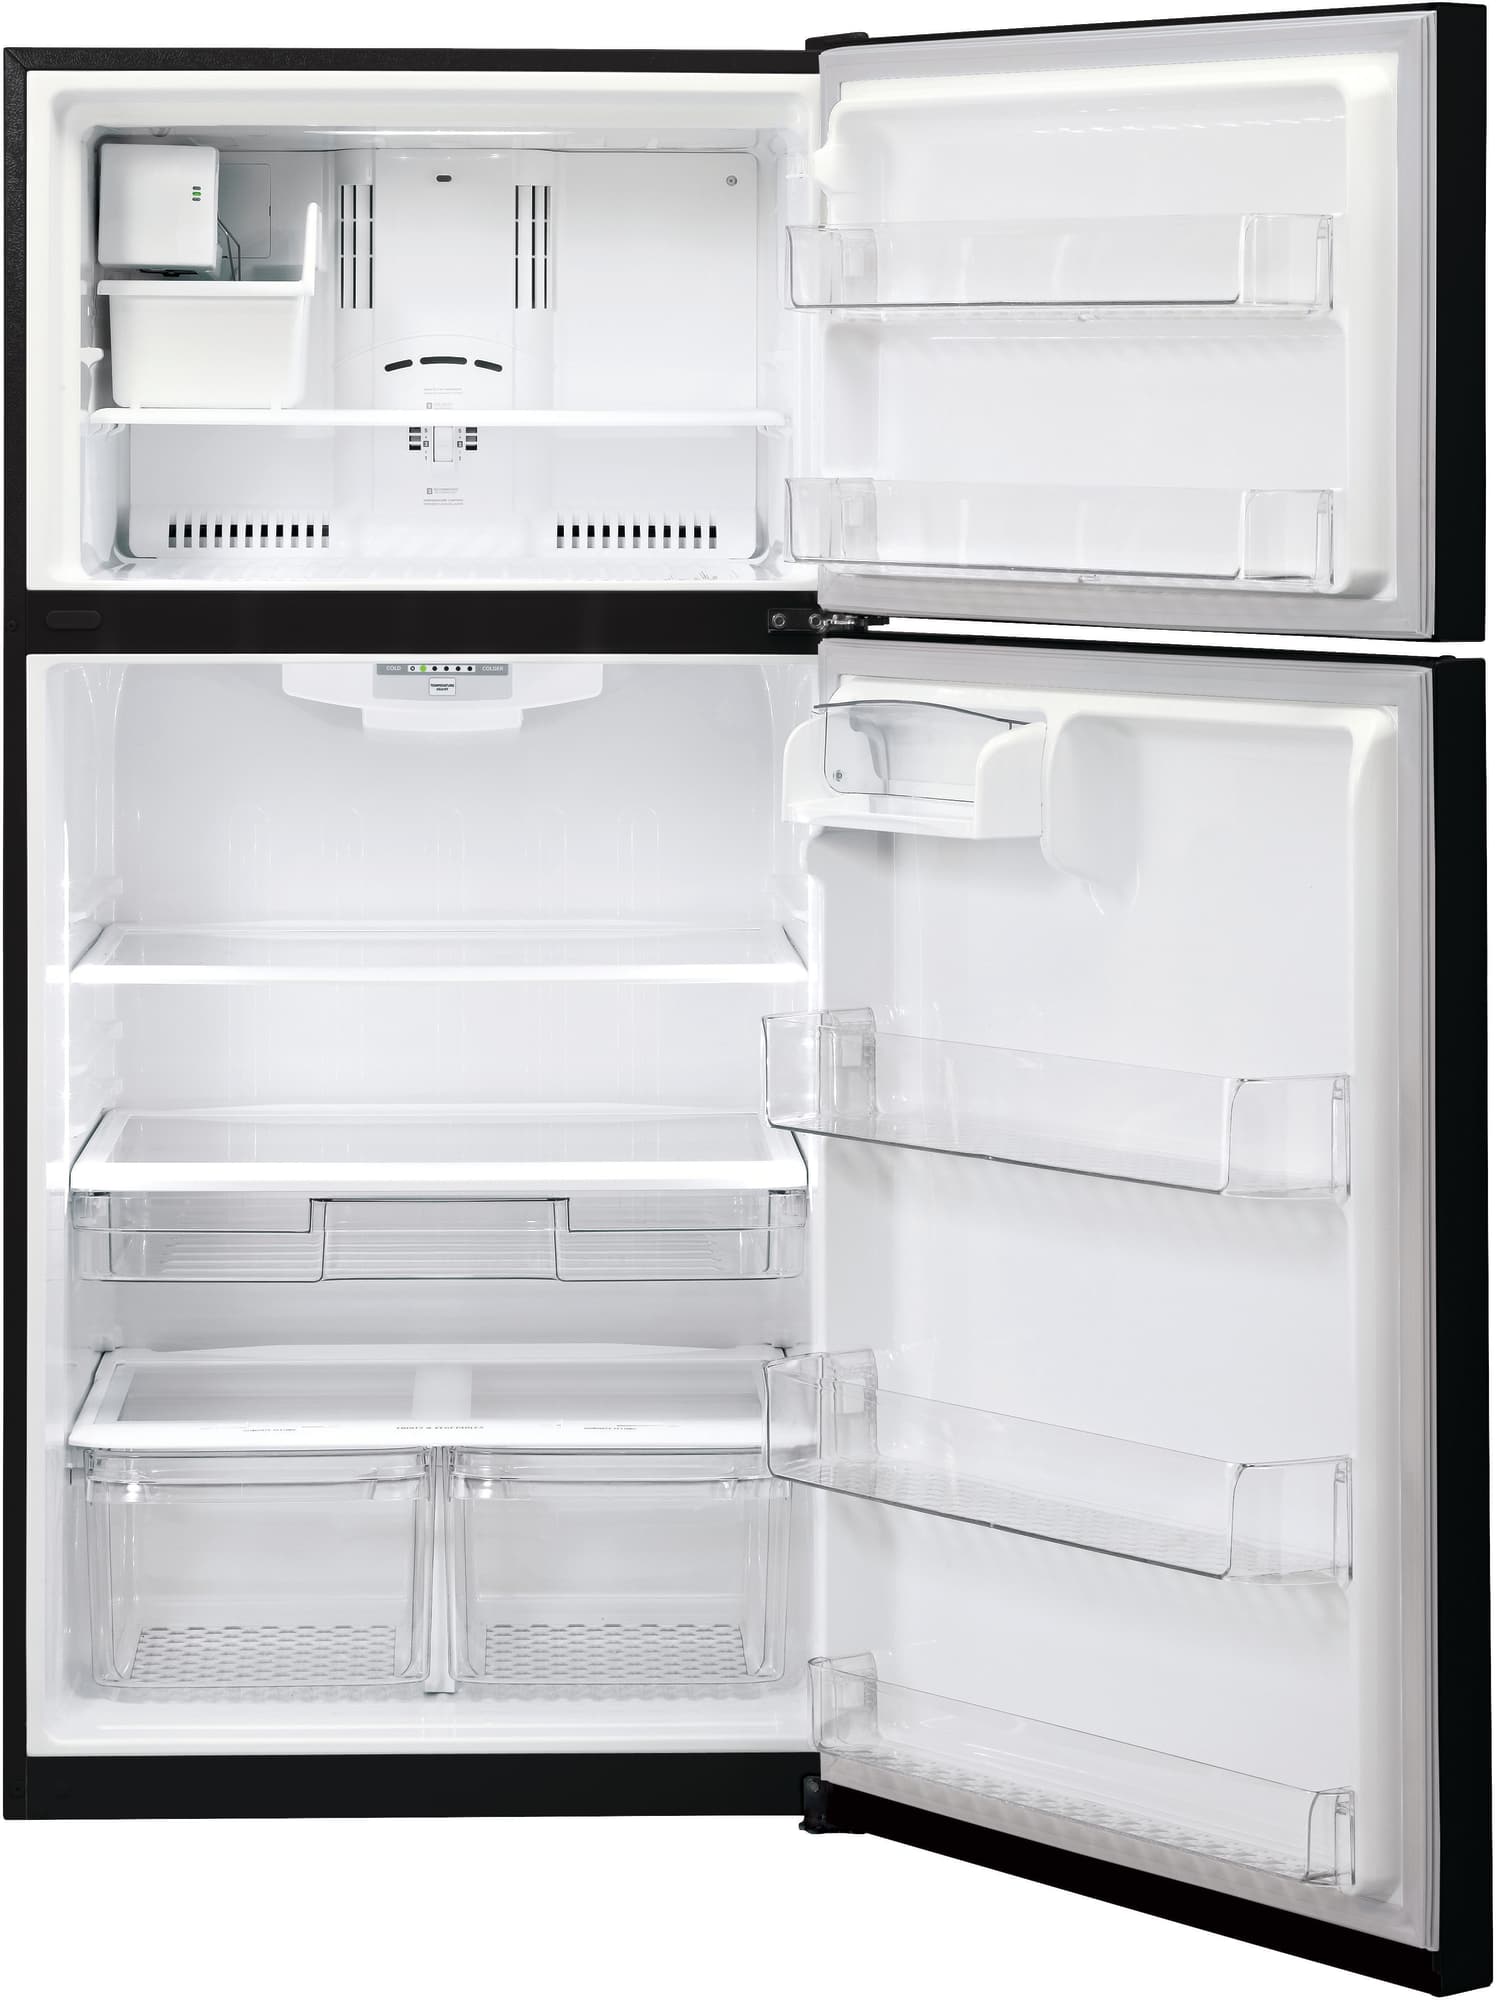 LG LTCS20220B 30 Inch Top-Freezer Refrigerator with Ice Maker, Glide N ...